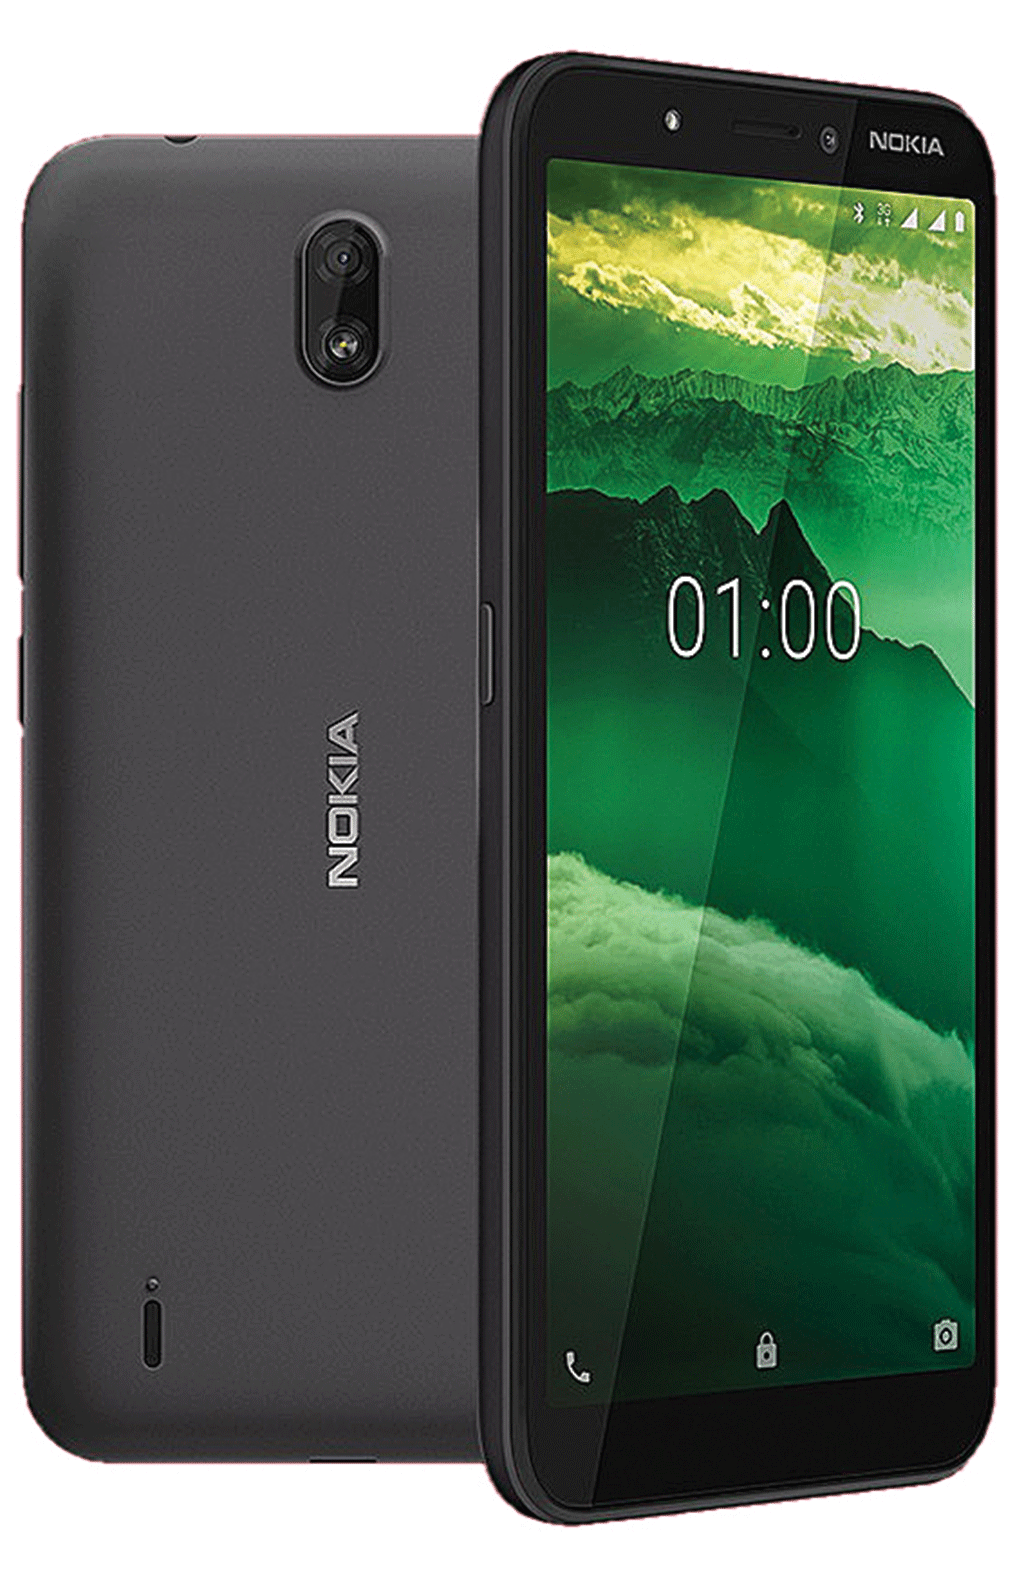 Nokia C1 now available in Nepal